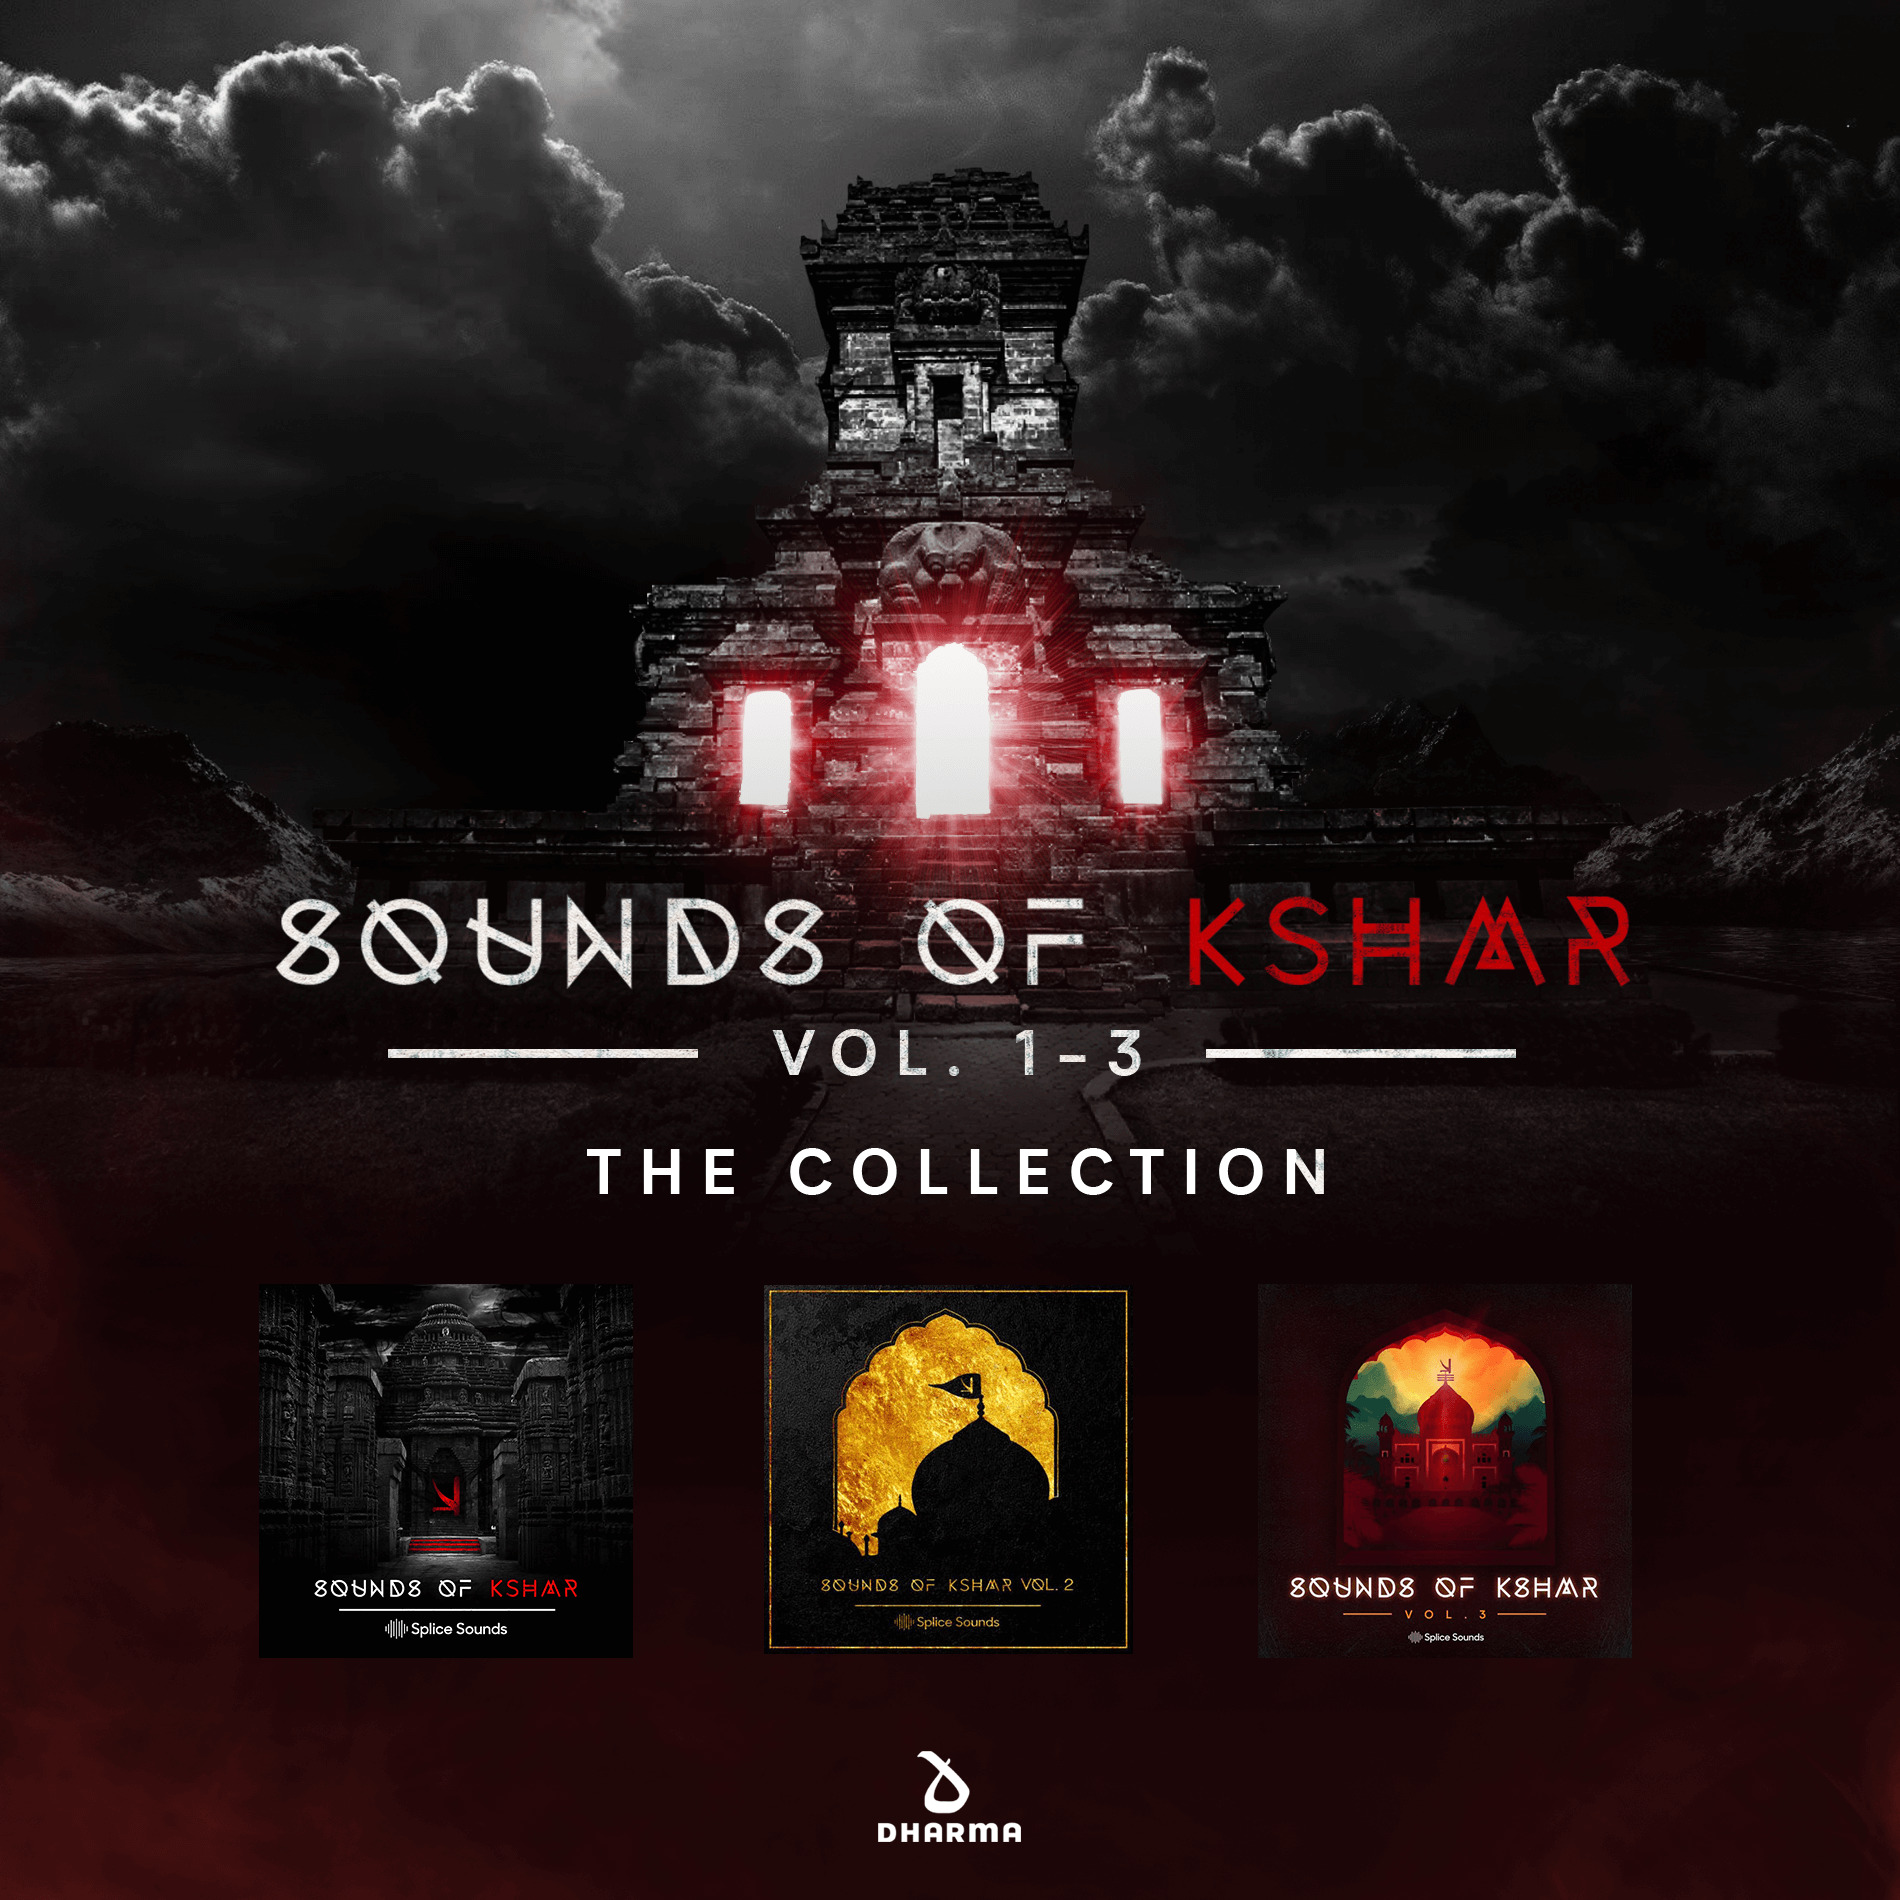 The Collection: Sounds of KSHMR Vol. 1-3